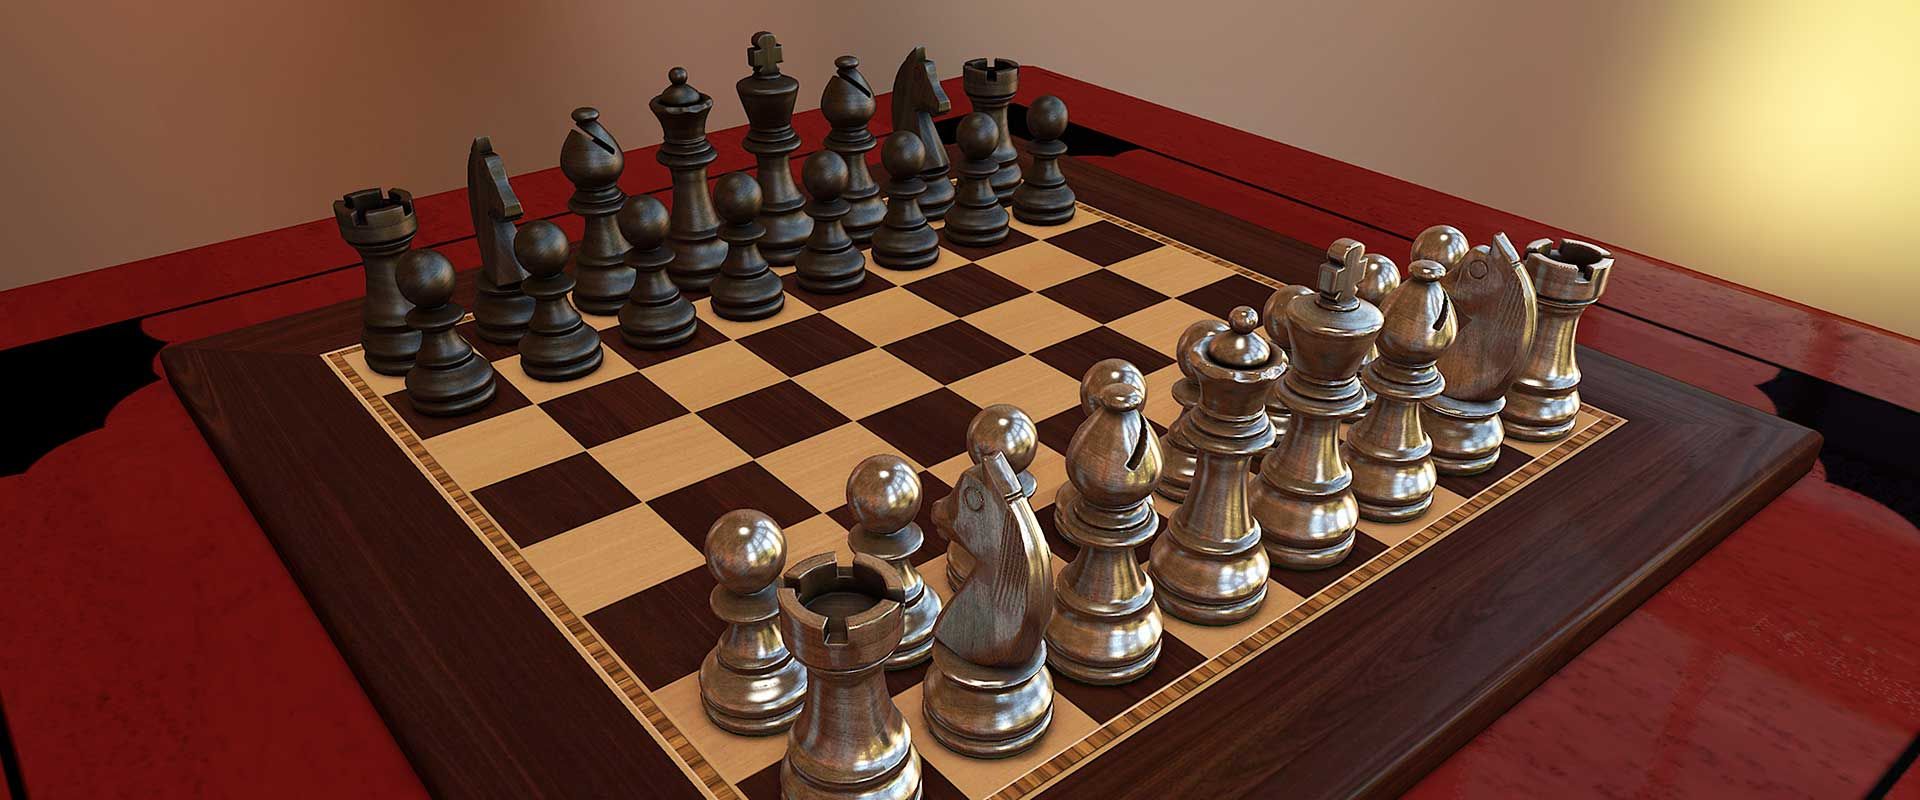 Chess Surges In Popularity Since The Pandemic